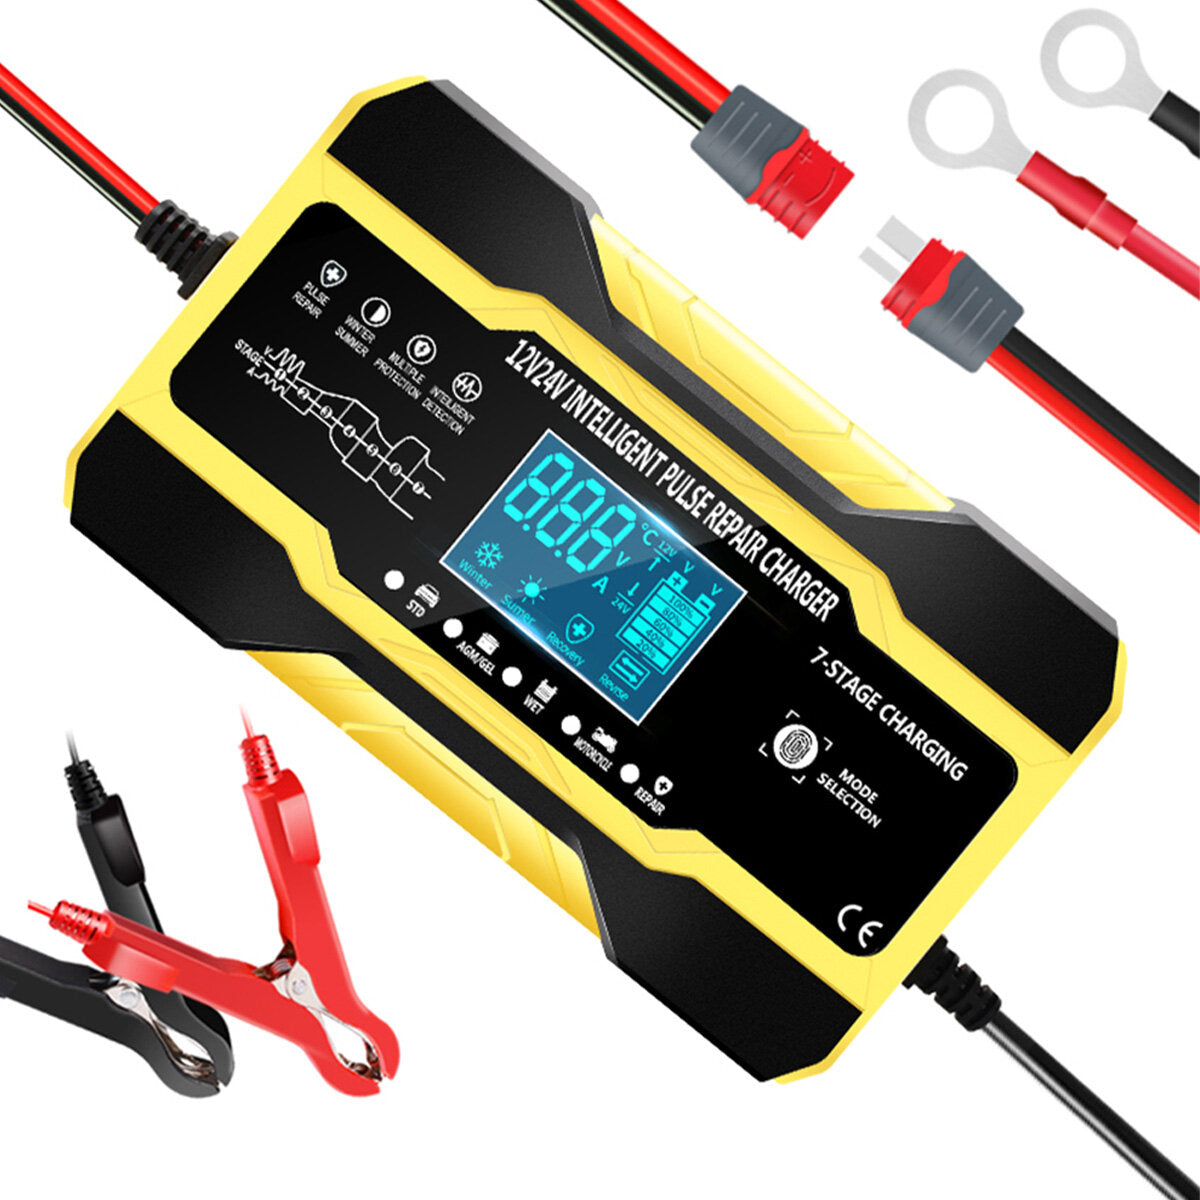 12 v 24 v 10a volautomatische acculader lcd-scherm power pulse repair charge voor auto motorfiets